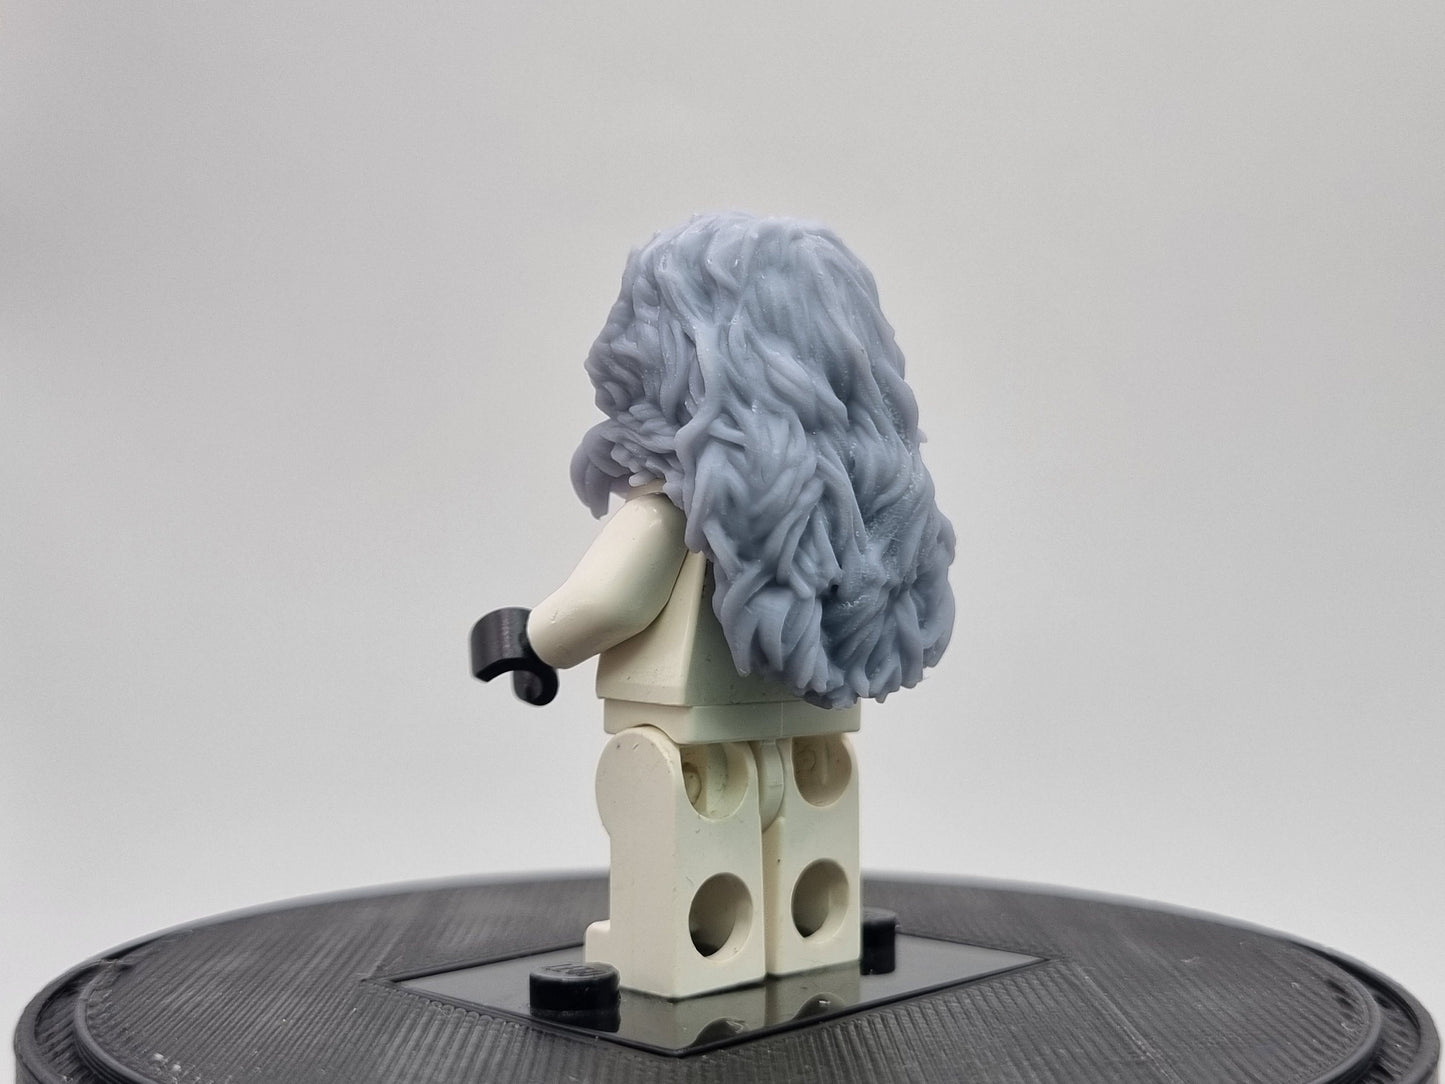 Building toy custom 3D printed witch hairpiece!